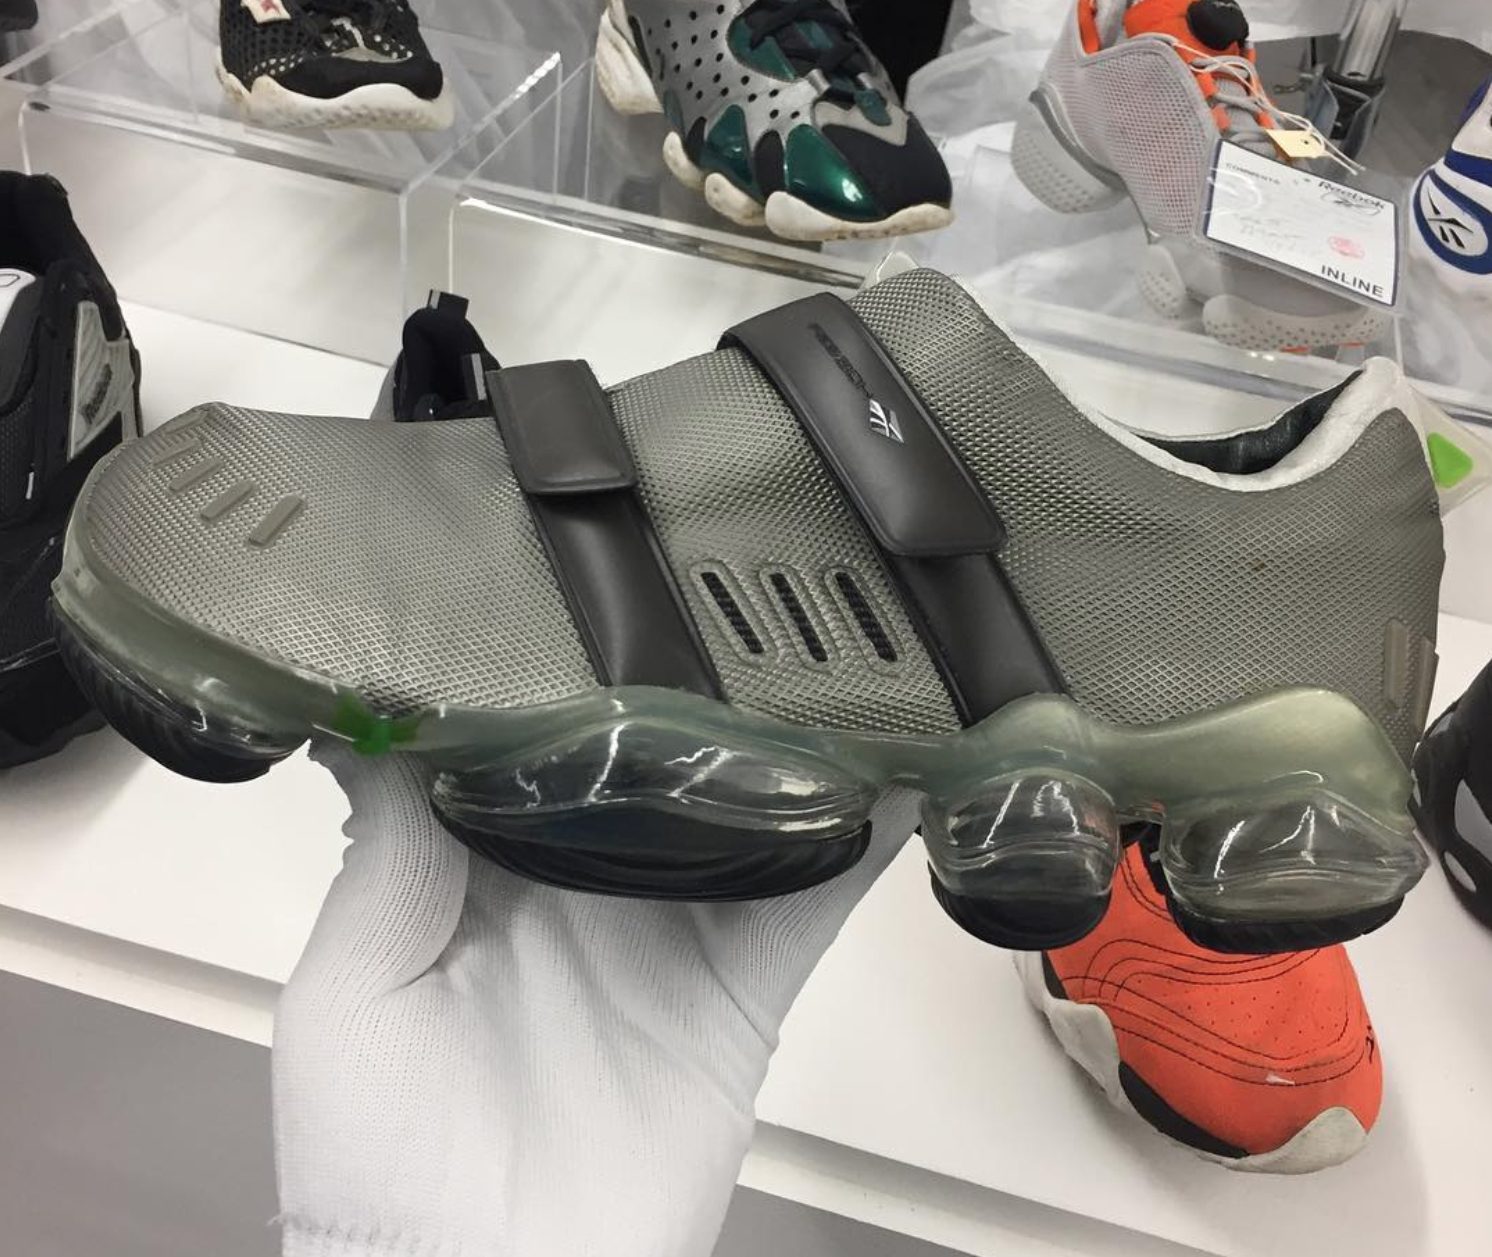 Reebok Created its Own VaporMax 15 Years Ago - WearTesters